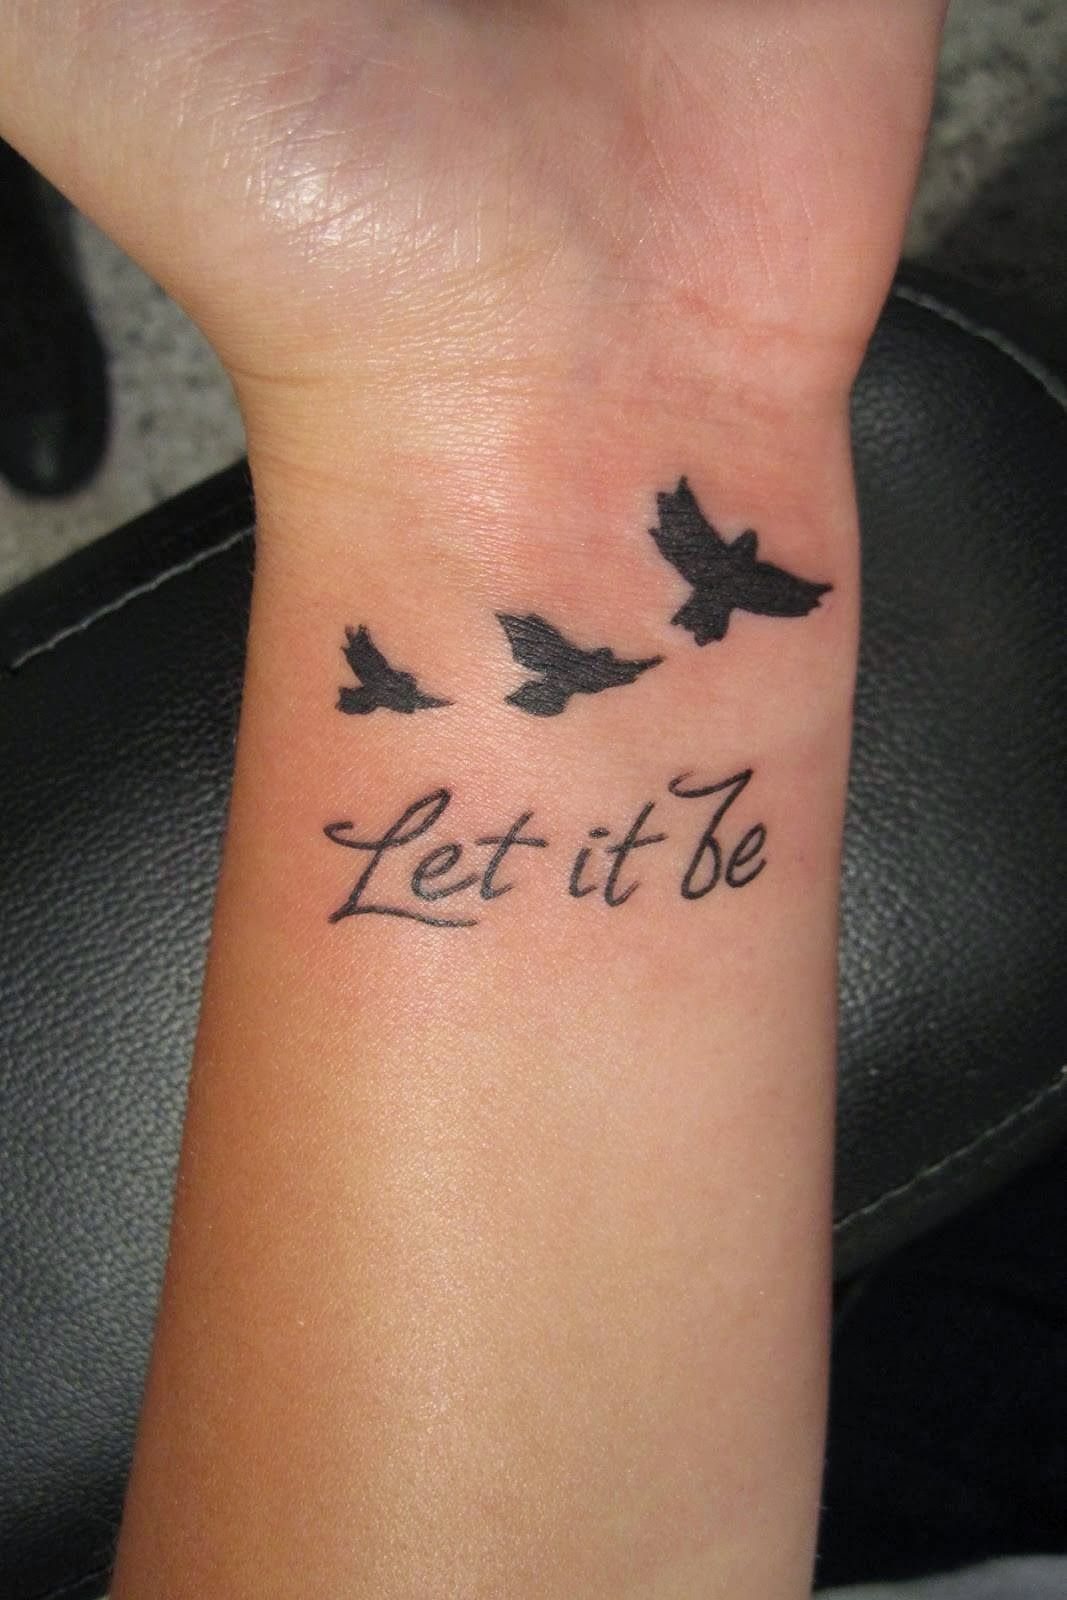 Let It Be Writing And Flying Birds Tattoo On Wrist Tattoo Mania intended for dimensions 1067 X 1600